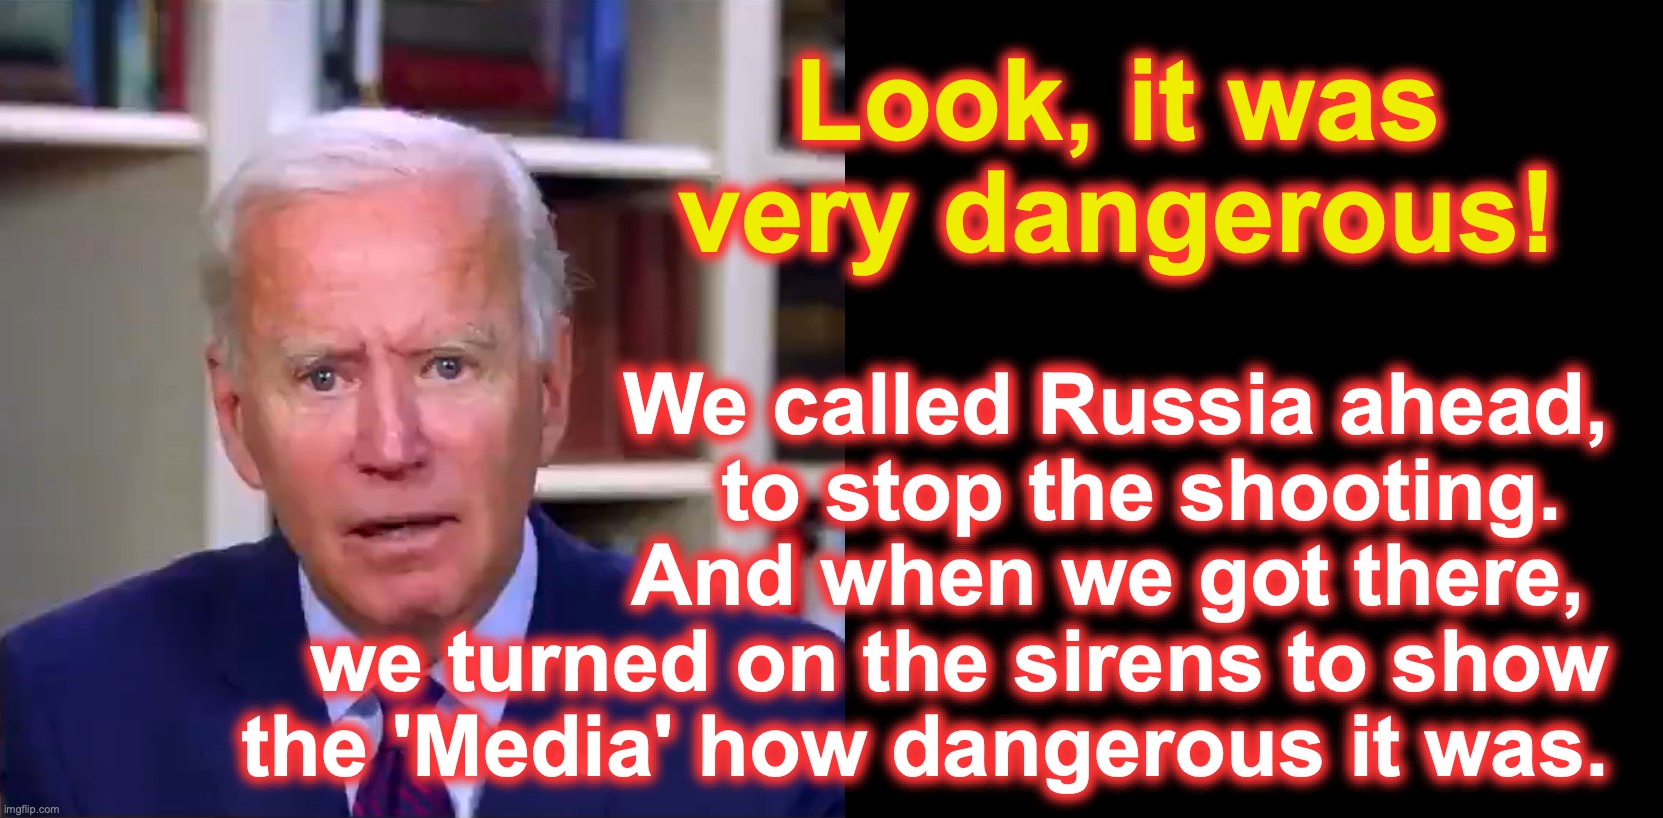 Biden too, likes to live dangerously [warning: hazardous satire] | We called Russia ahead,
 to stop the shooting.  
And when we got there, 
we turned on the sirens to show the 'Media' how dangerous it was. Look, it was very dangerous! | image tagged in slow joe biden dementia face,i too like to live dangerously | made w/ Imgflip meme maker